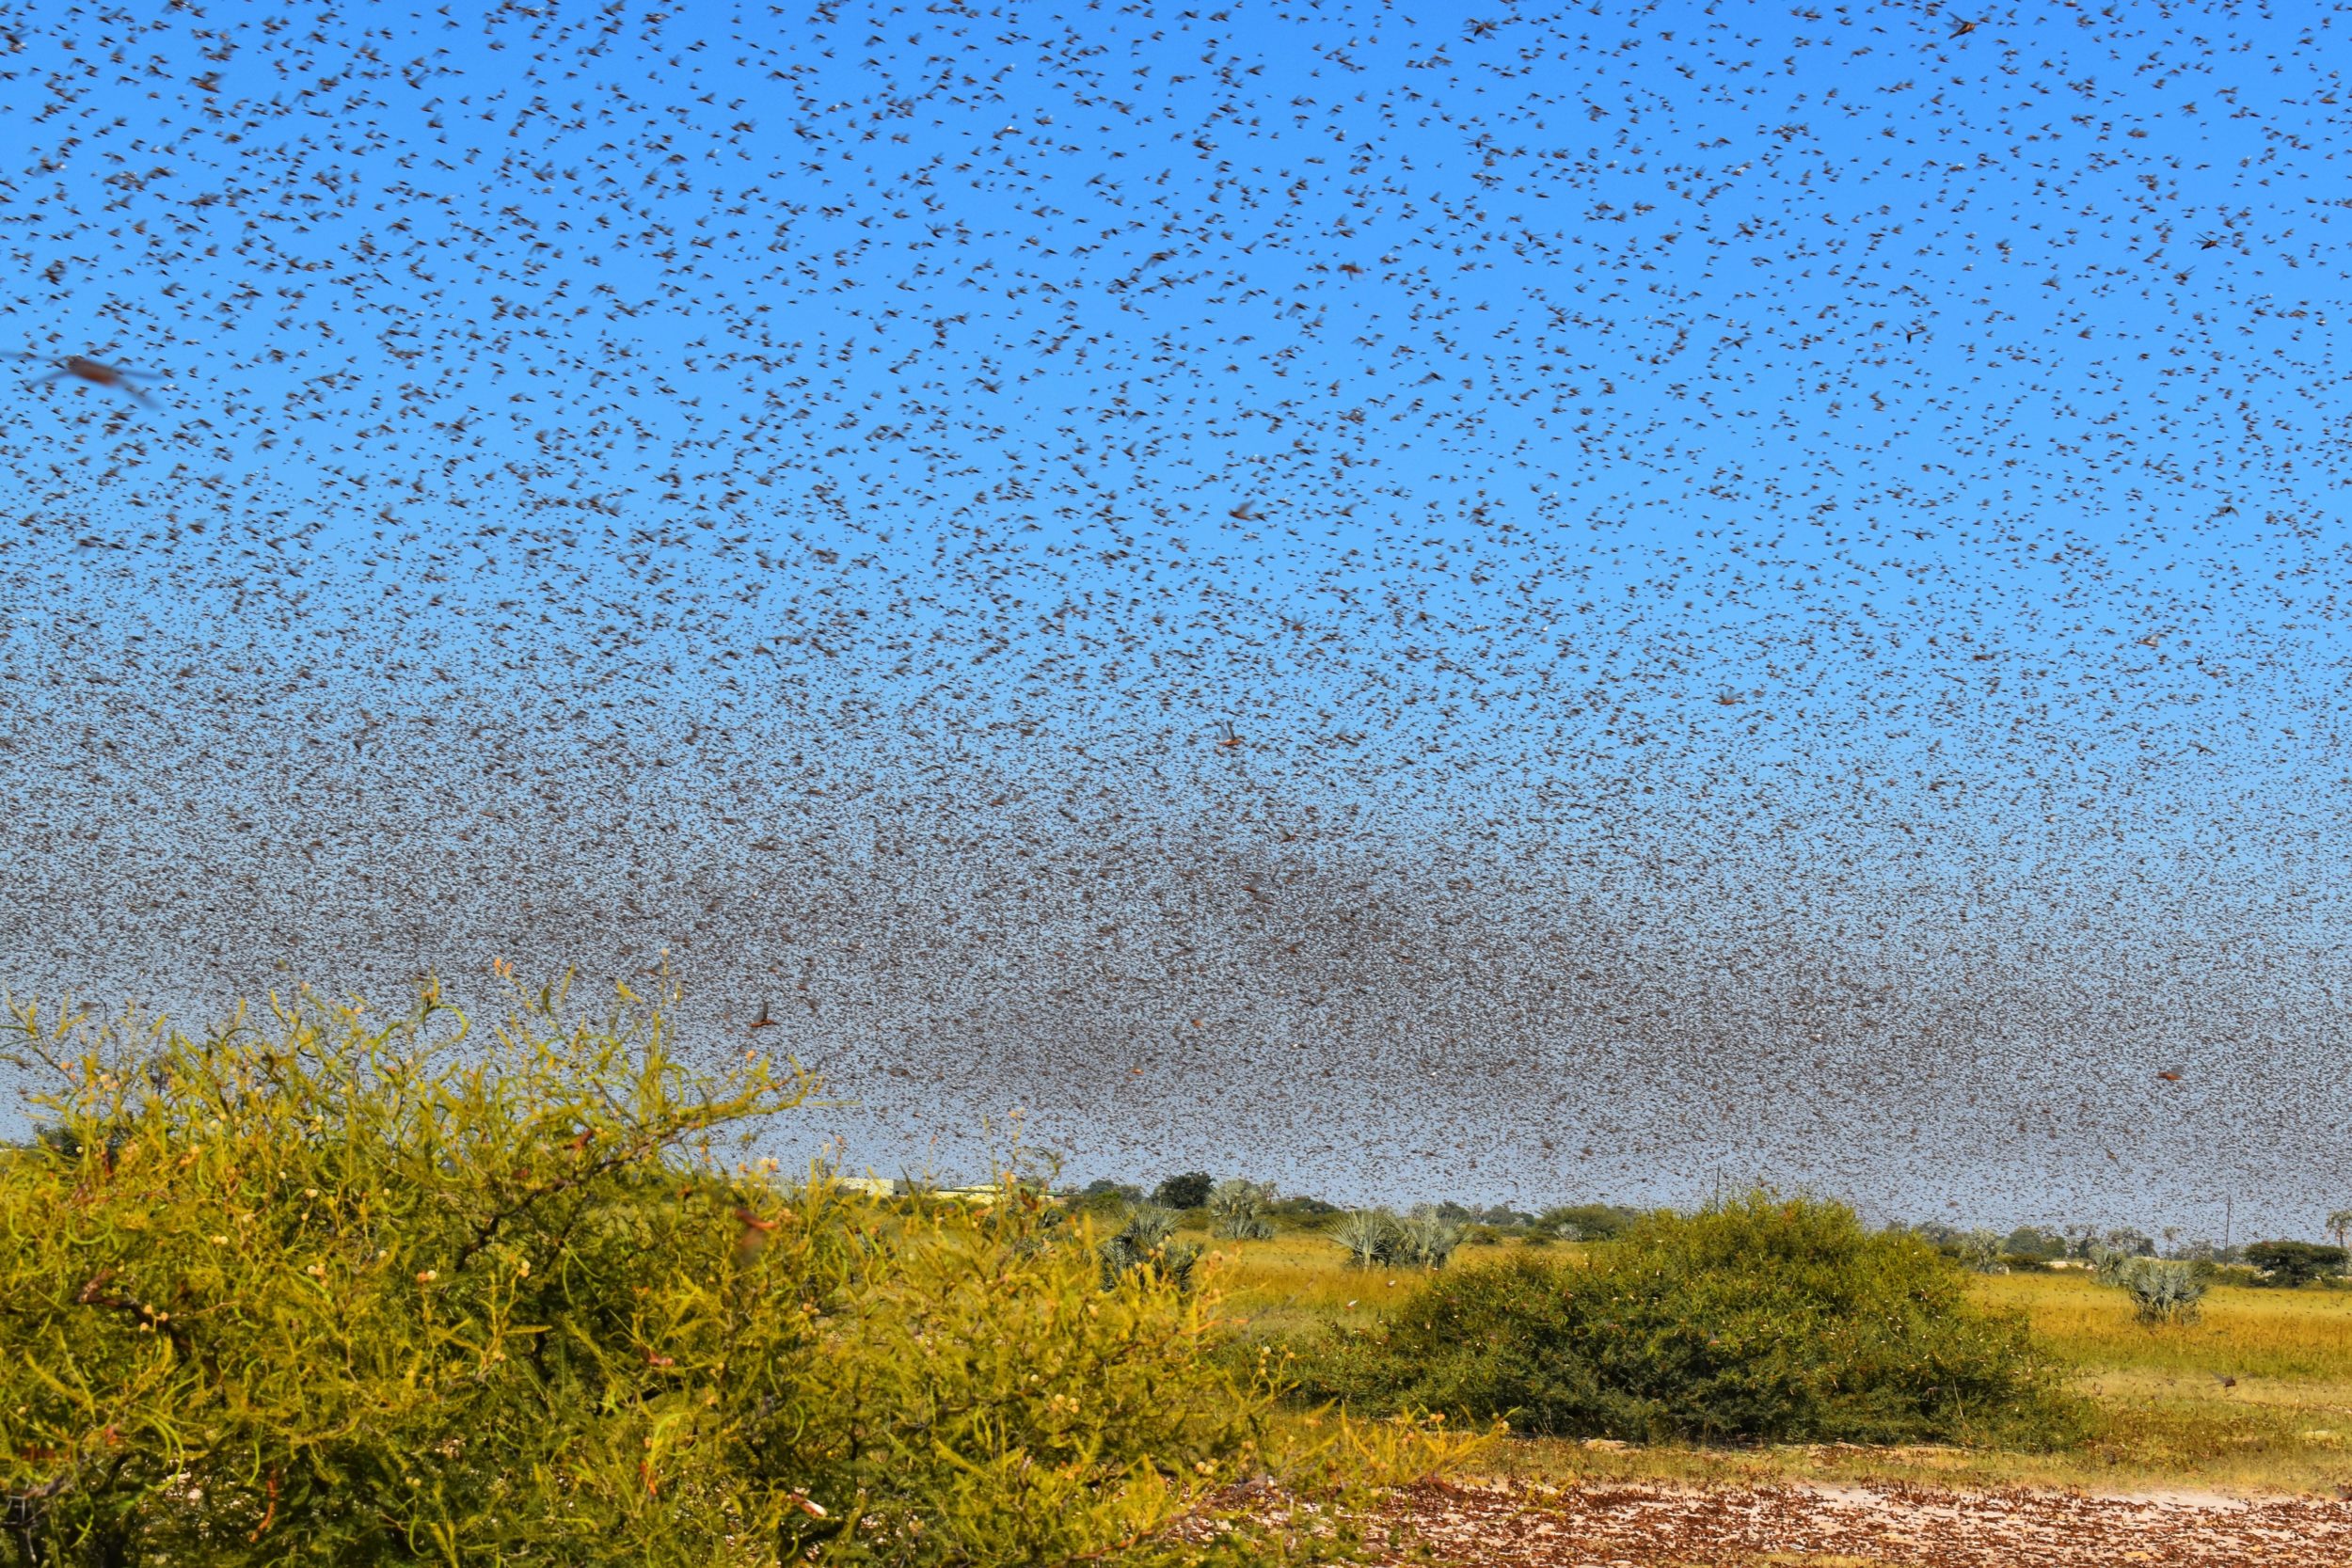 Locust swarms in Namibia